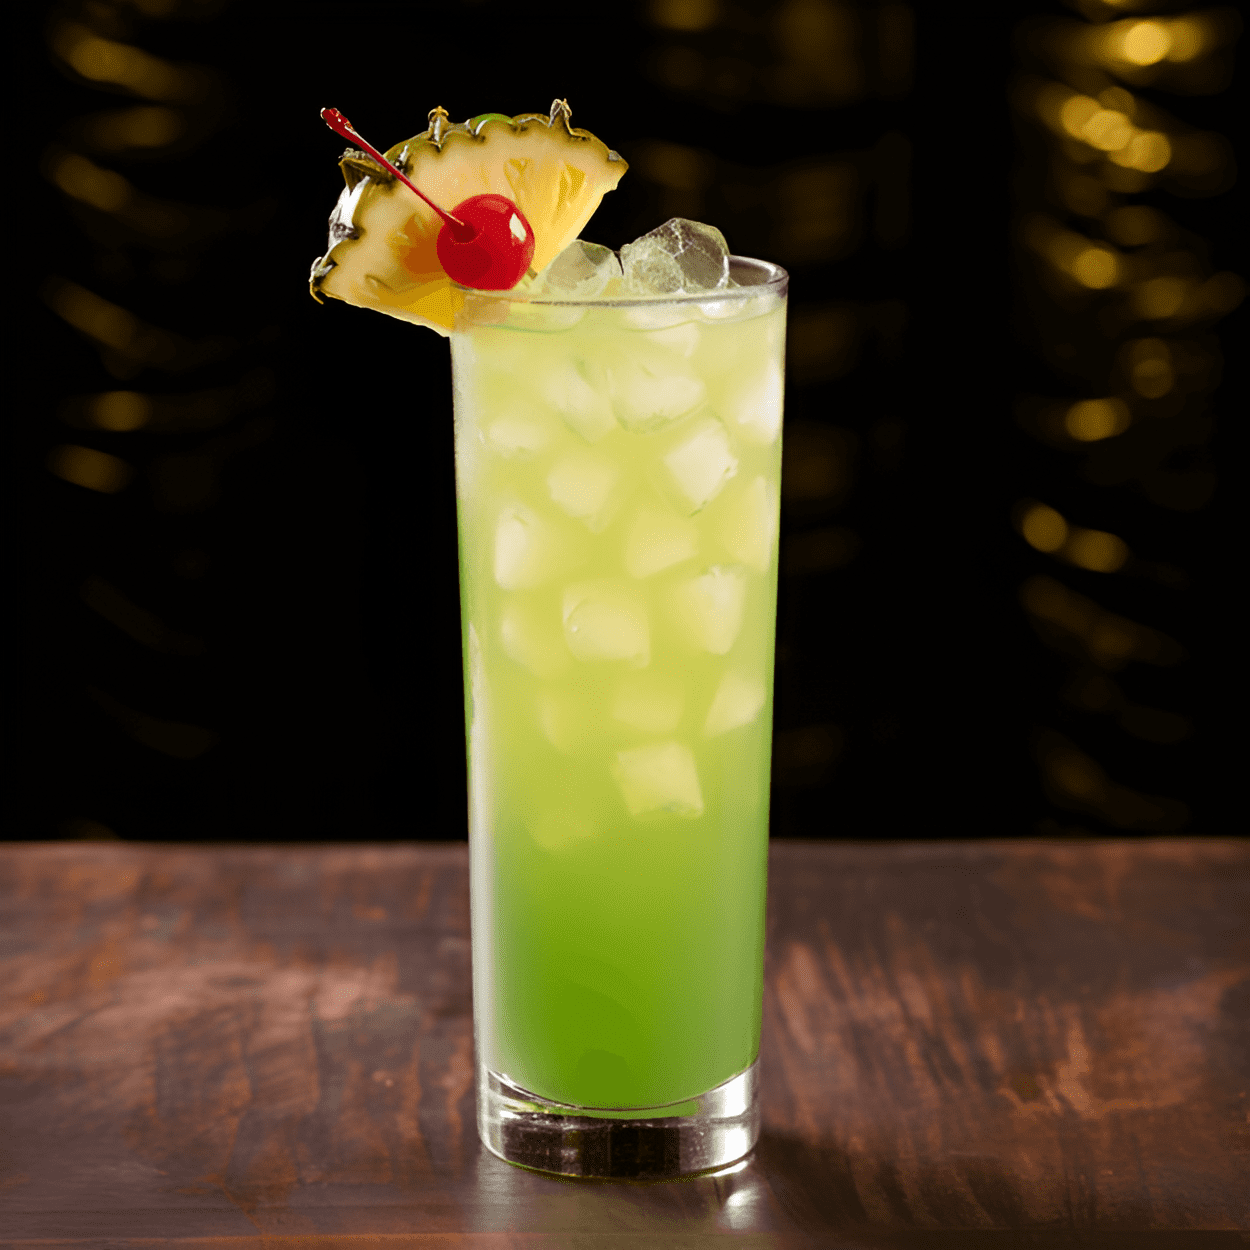 Cactus Flower Cocktail Recipe - The Cactus Flower cocktail is a delightful blend of sweet, sour, and fruity flavors. The tequila gives it a strong kick, while the pineapple juice and lime add a tangy twist. The agave nectar balances out the sourness with a natural sweetness, making it a well-rounded, refreshing drink.